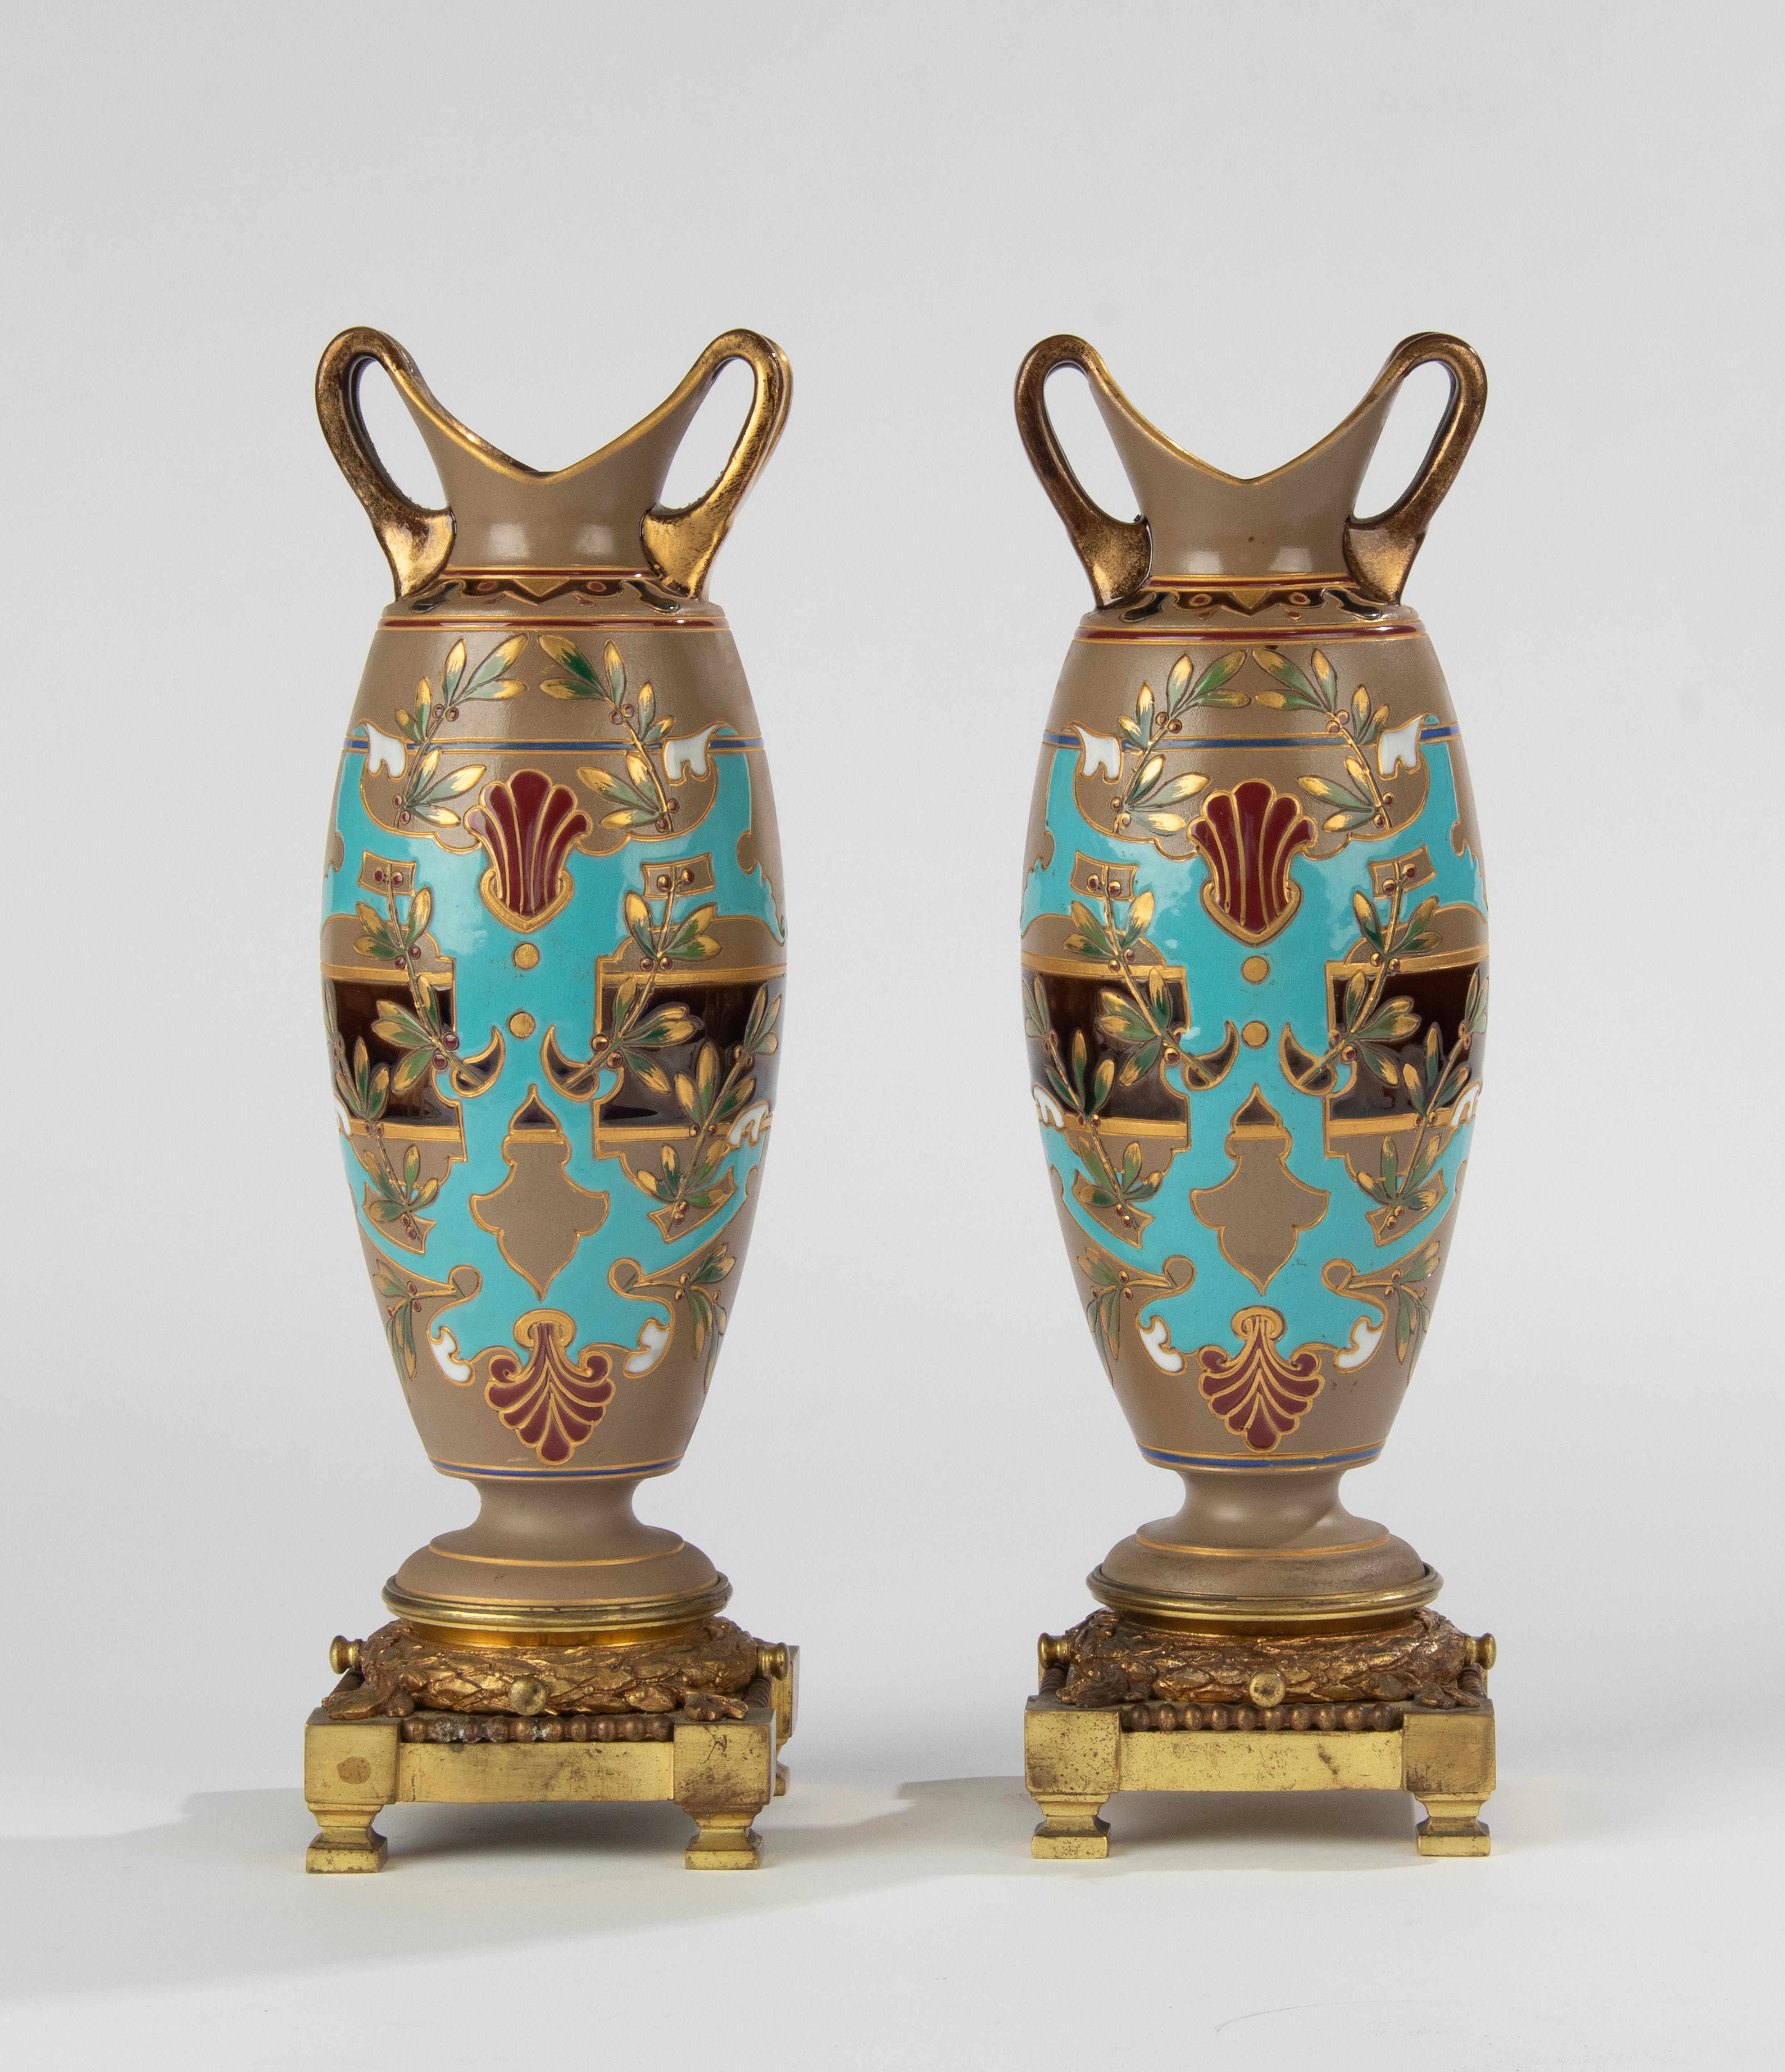 A beautiful pair of ceramic majolica vases with bronze base, made by the French brand Sarregumines.
The ceramic part is nicely designed with special colors. The bronze base is gilded.
The bottom of the vases are marked.
The vases are in very good